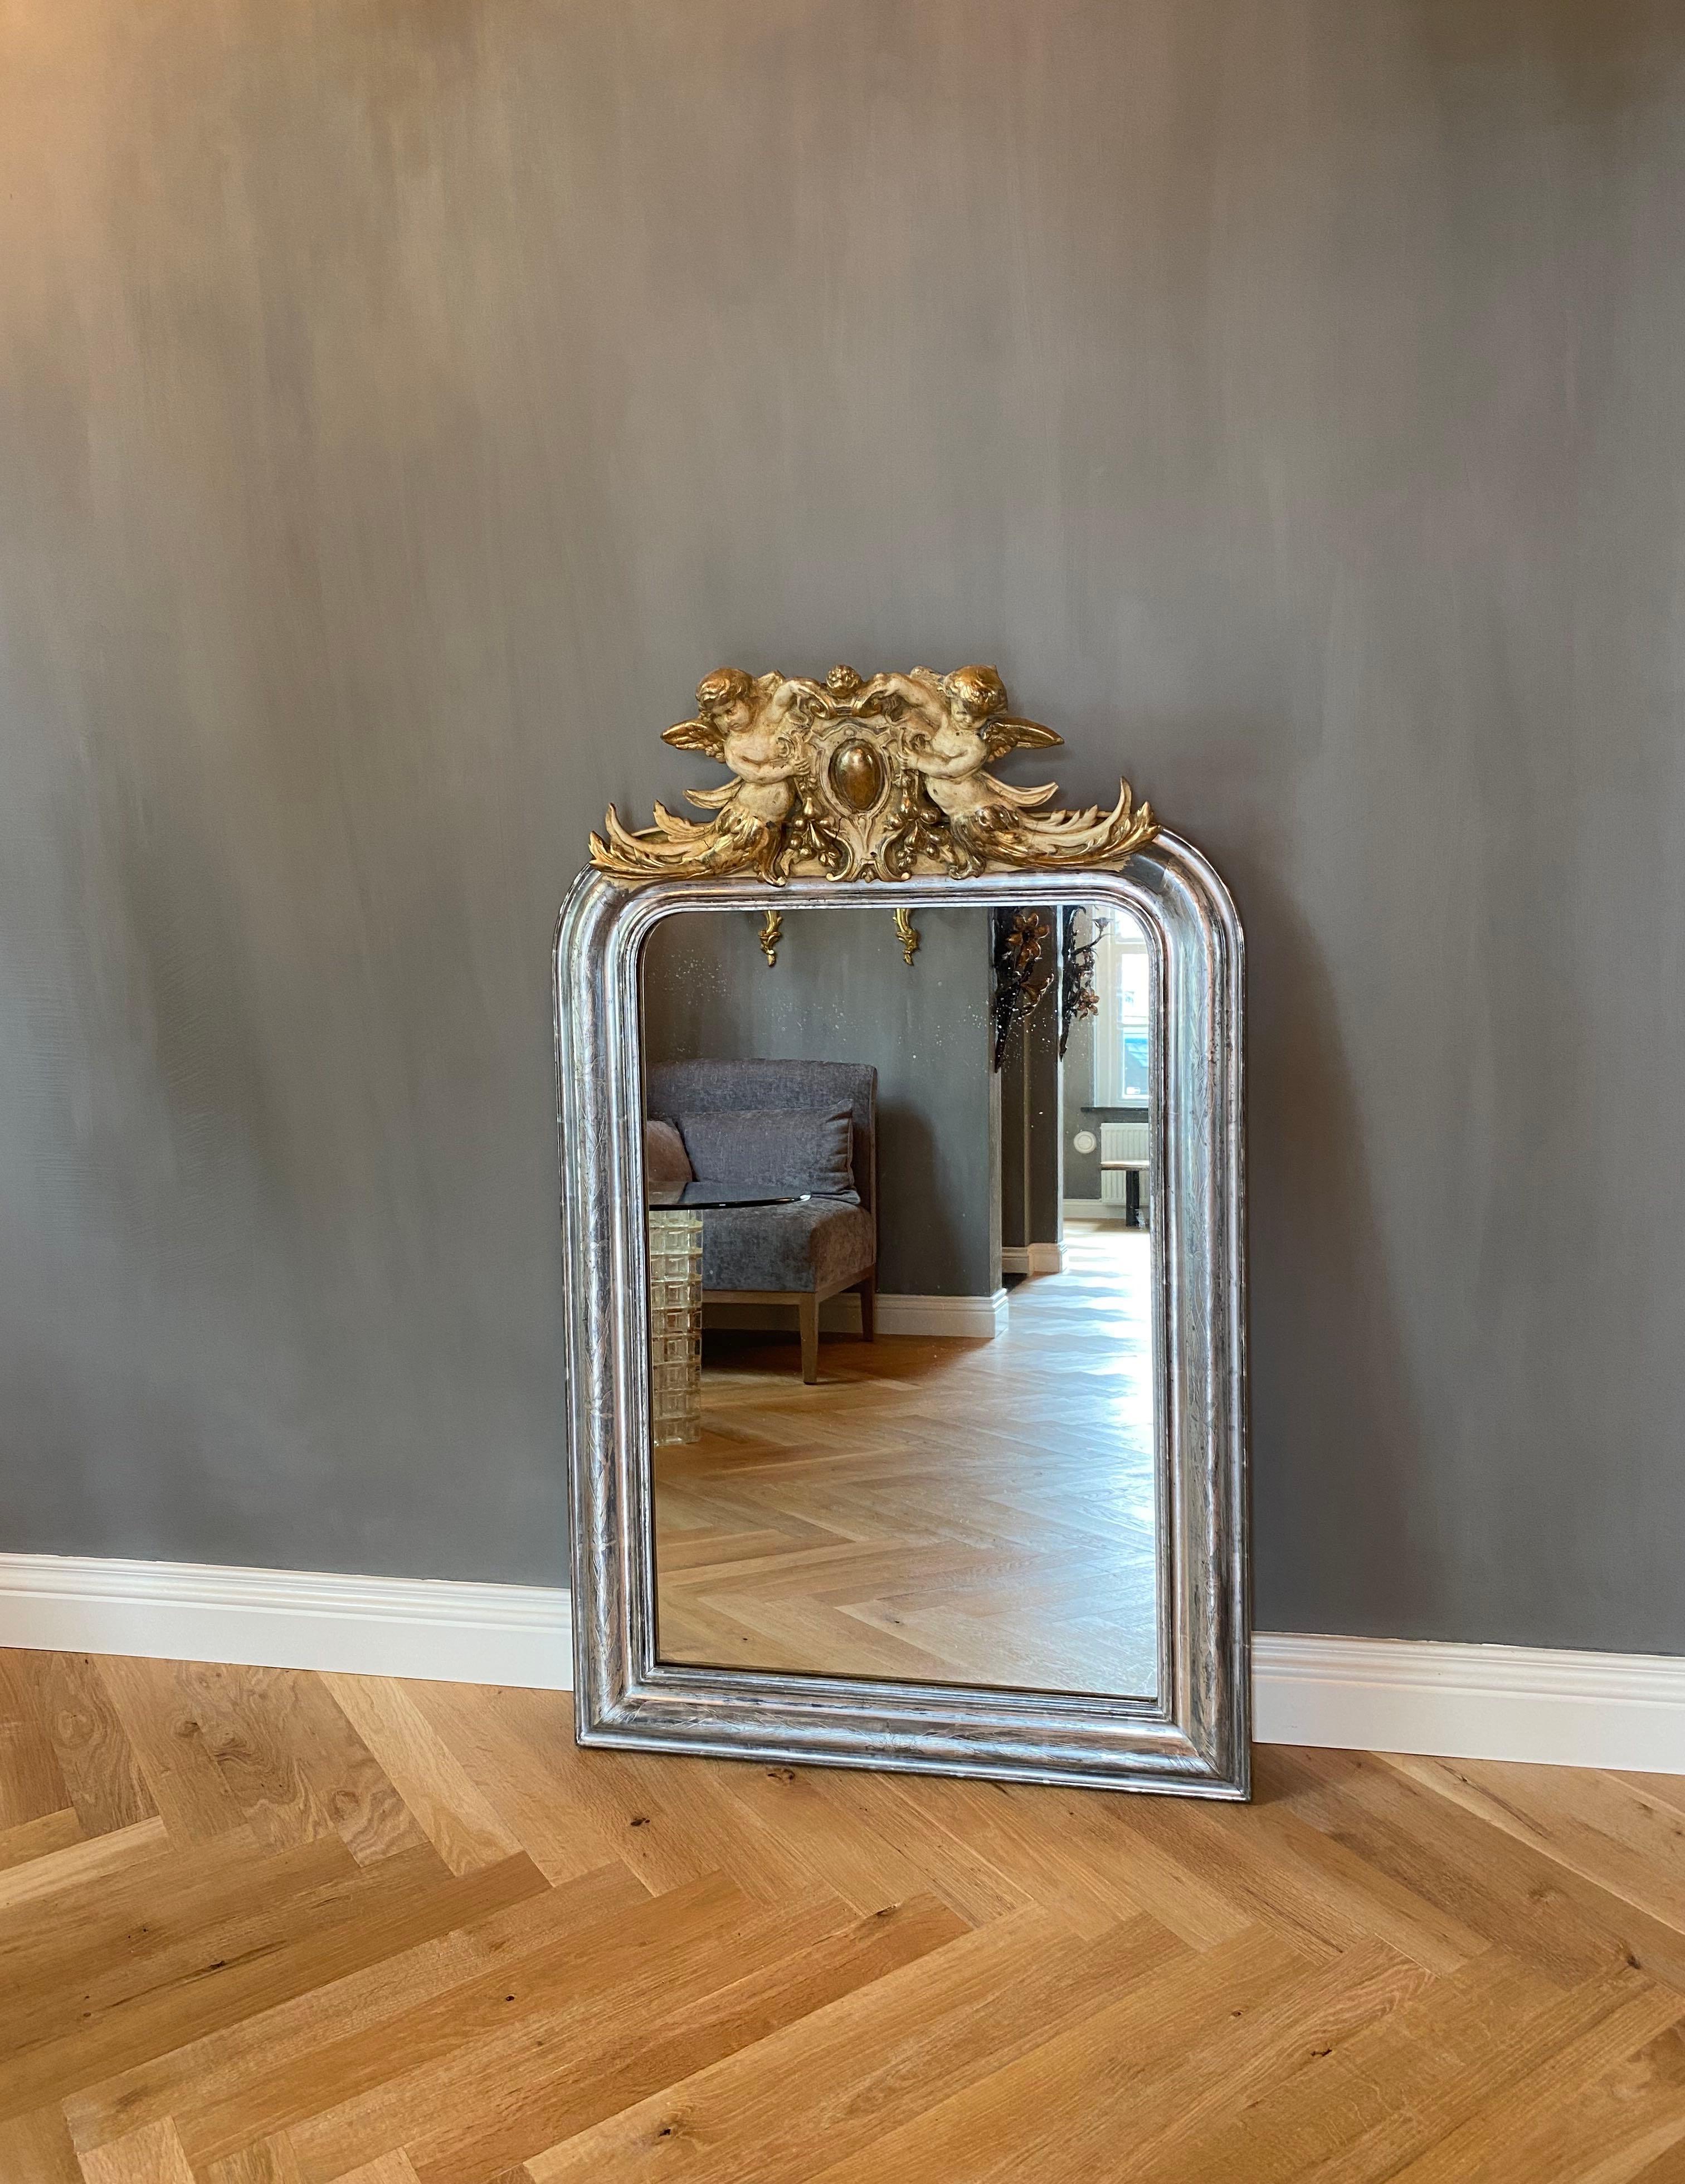 Very pretty 19th c. French mirror with its original slightly foxed antique glass and silver leaf gilding.
The beautiful open work crest is representing two cherubs or putti holding a central medalion.
The frame is etched with flowers and leaves.
The